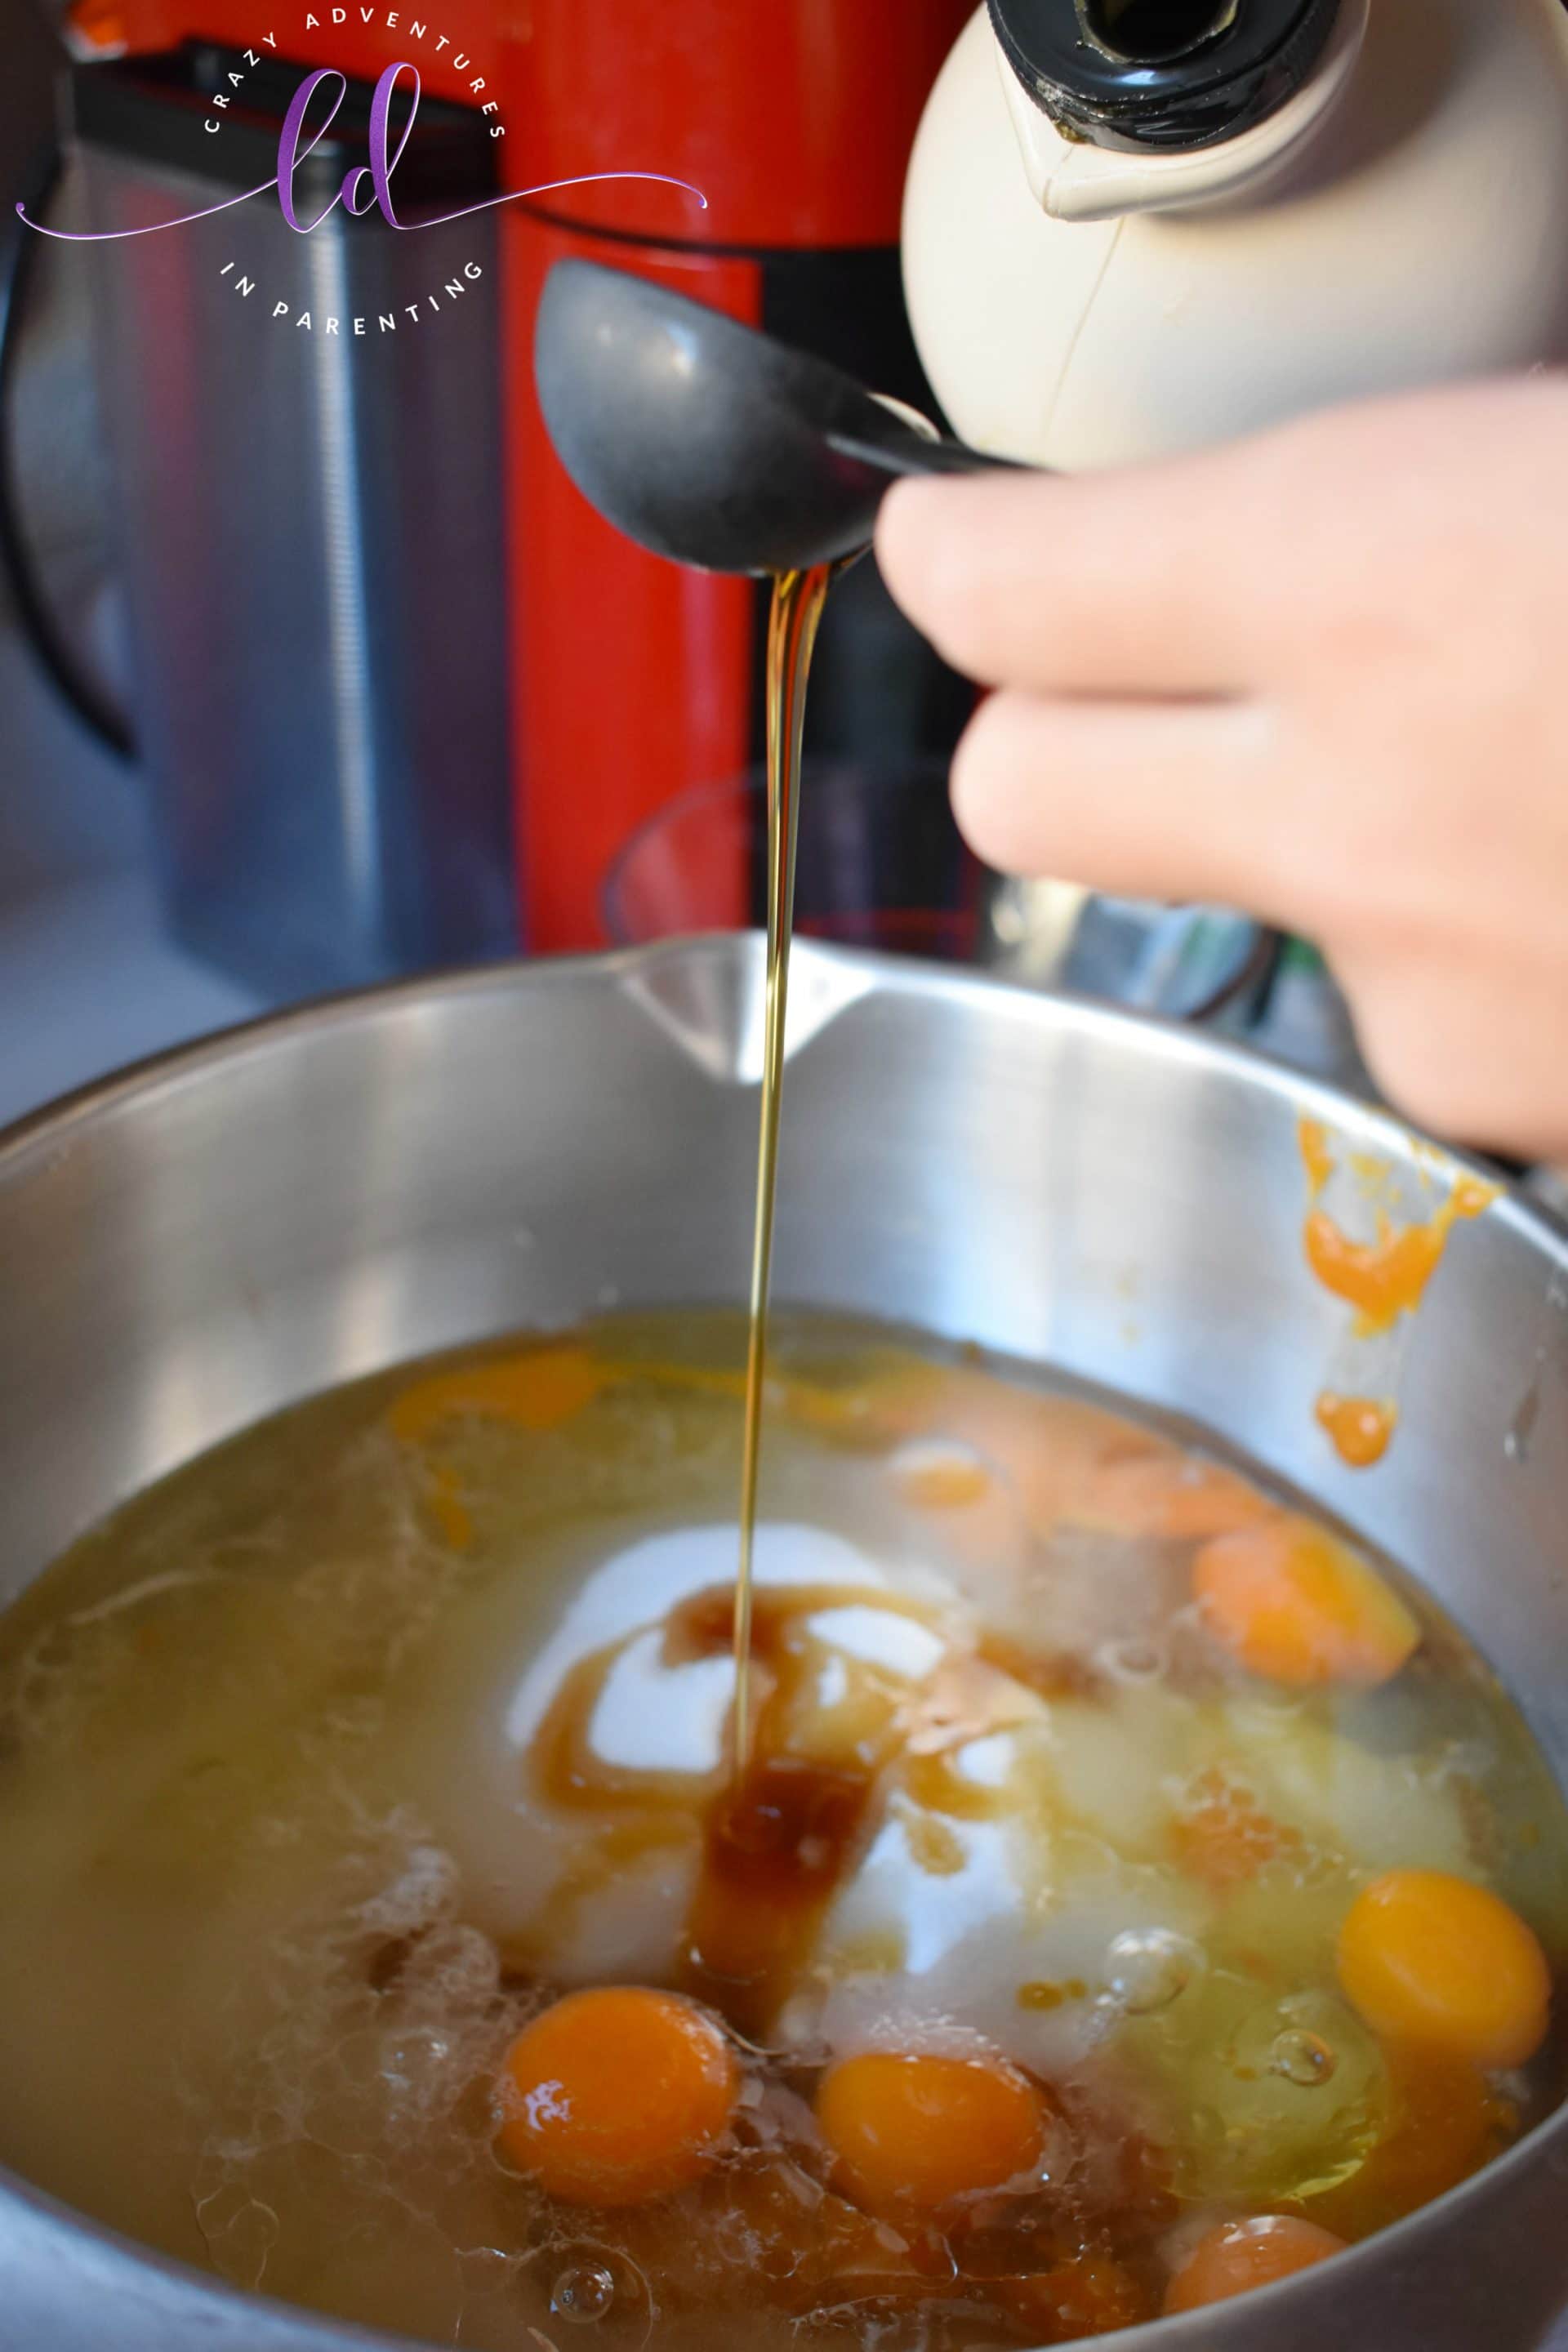 Add syrup to mix for pumpkin bread